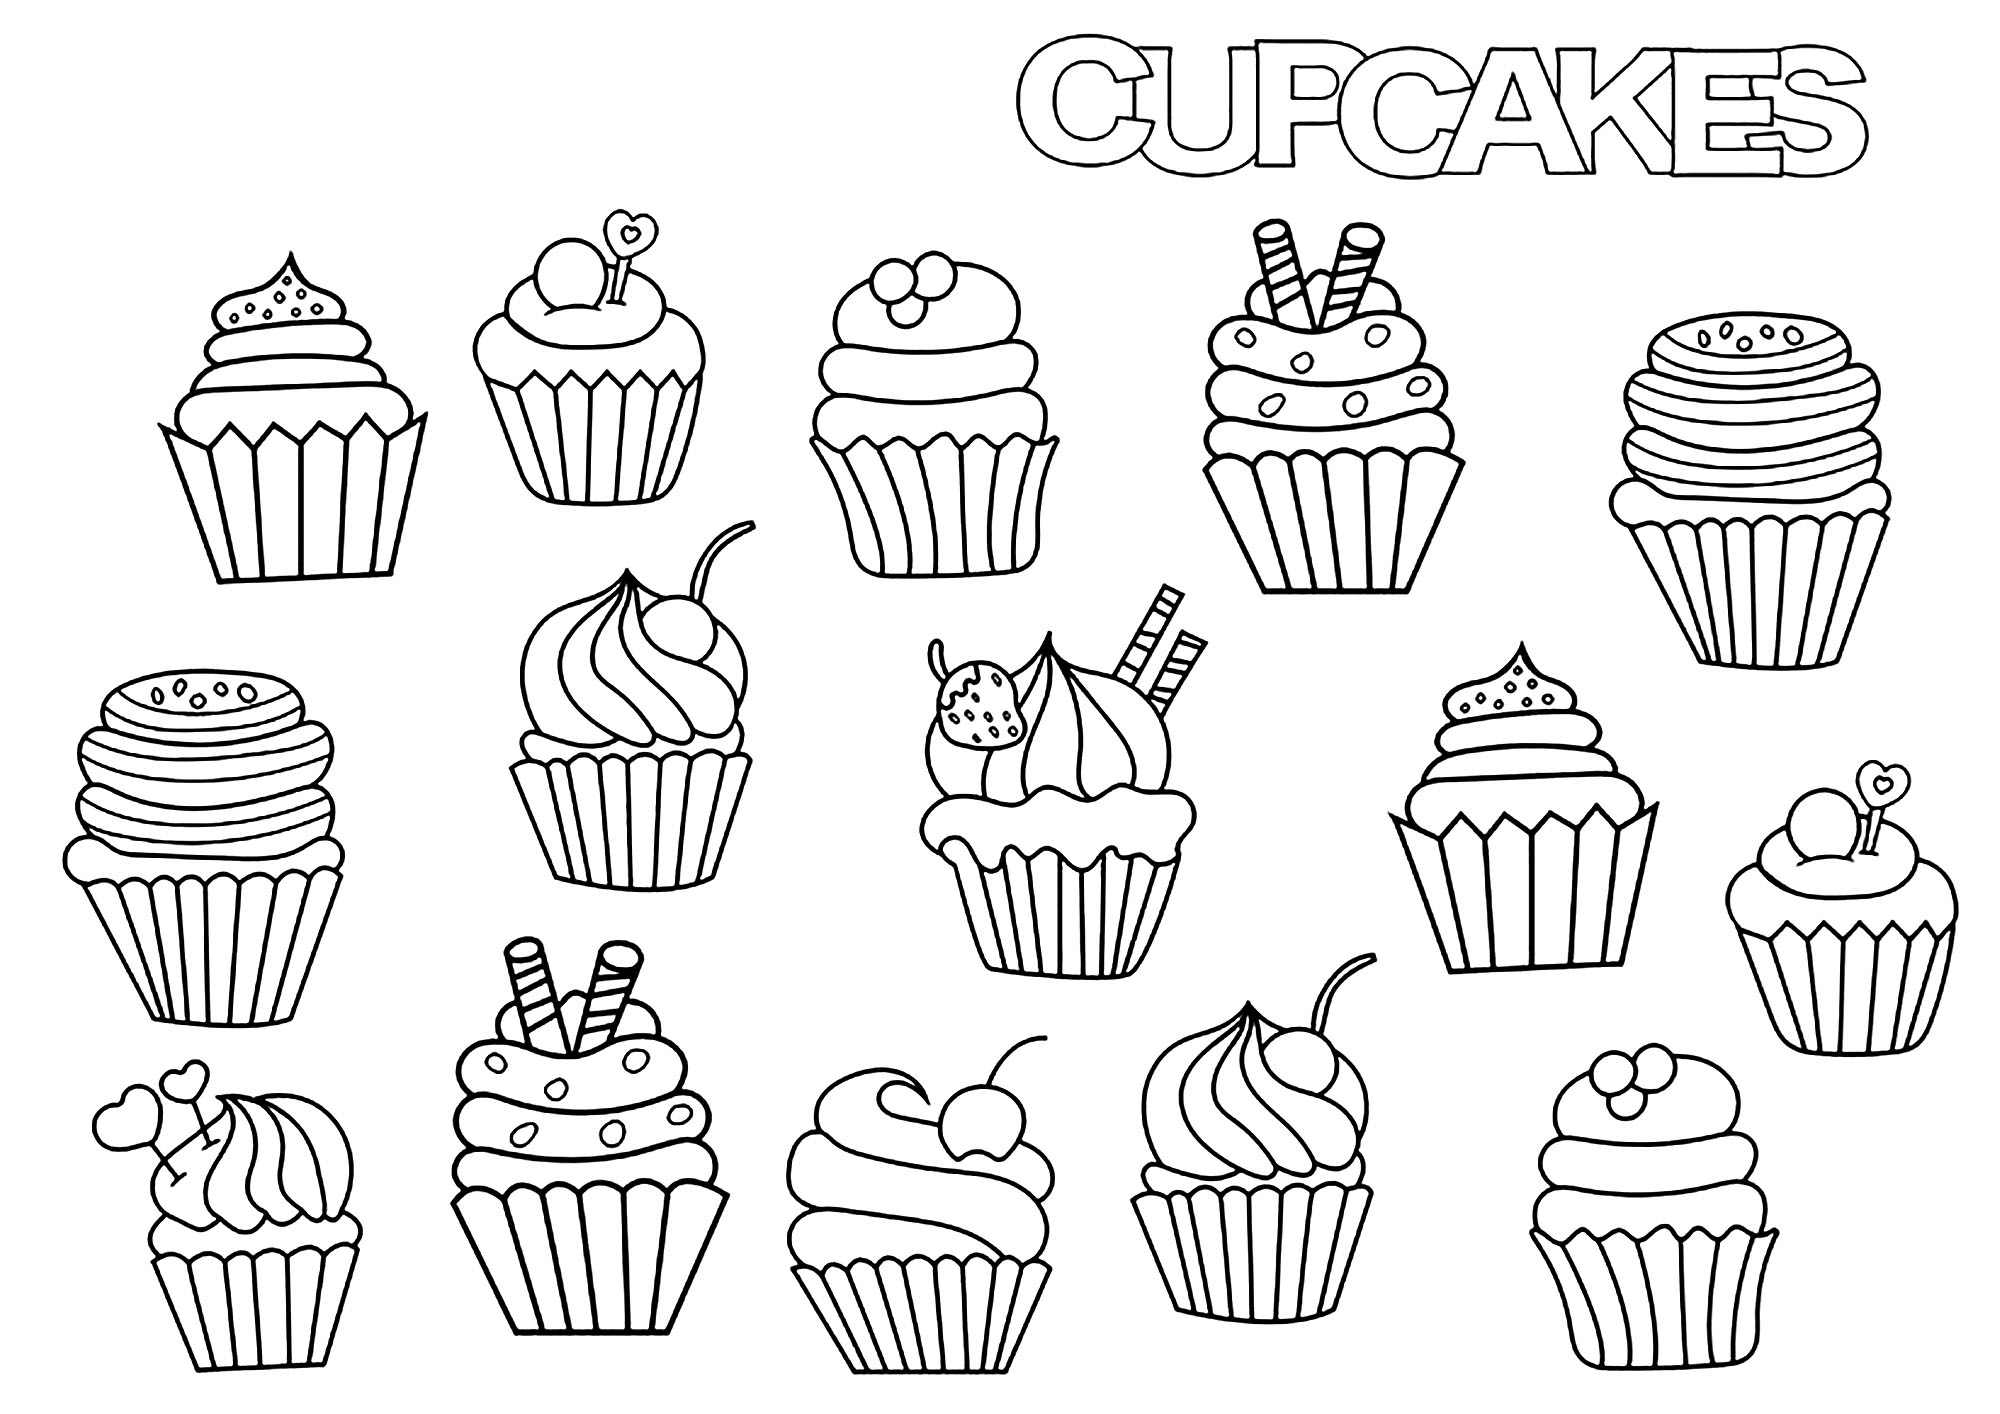 A perfect mix of nine cupcakes to satisfy the tastebuds!, Artist : Milana Adams ;$SOURCE$ 123rf